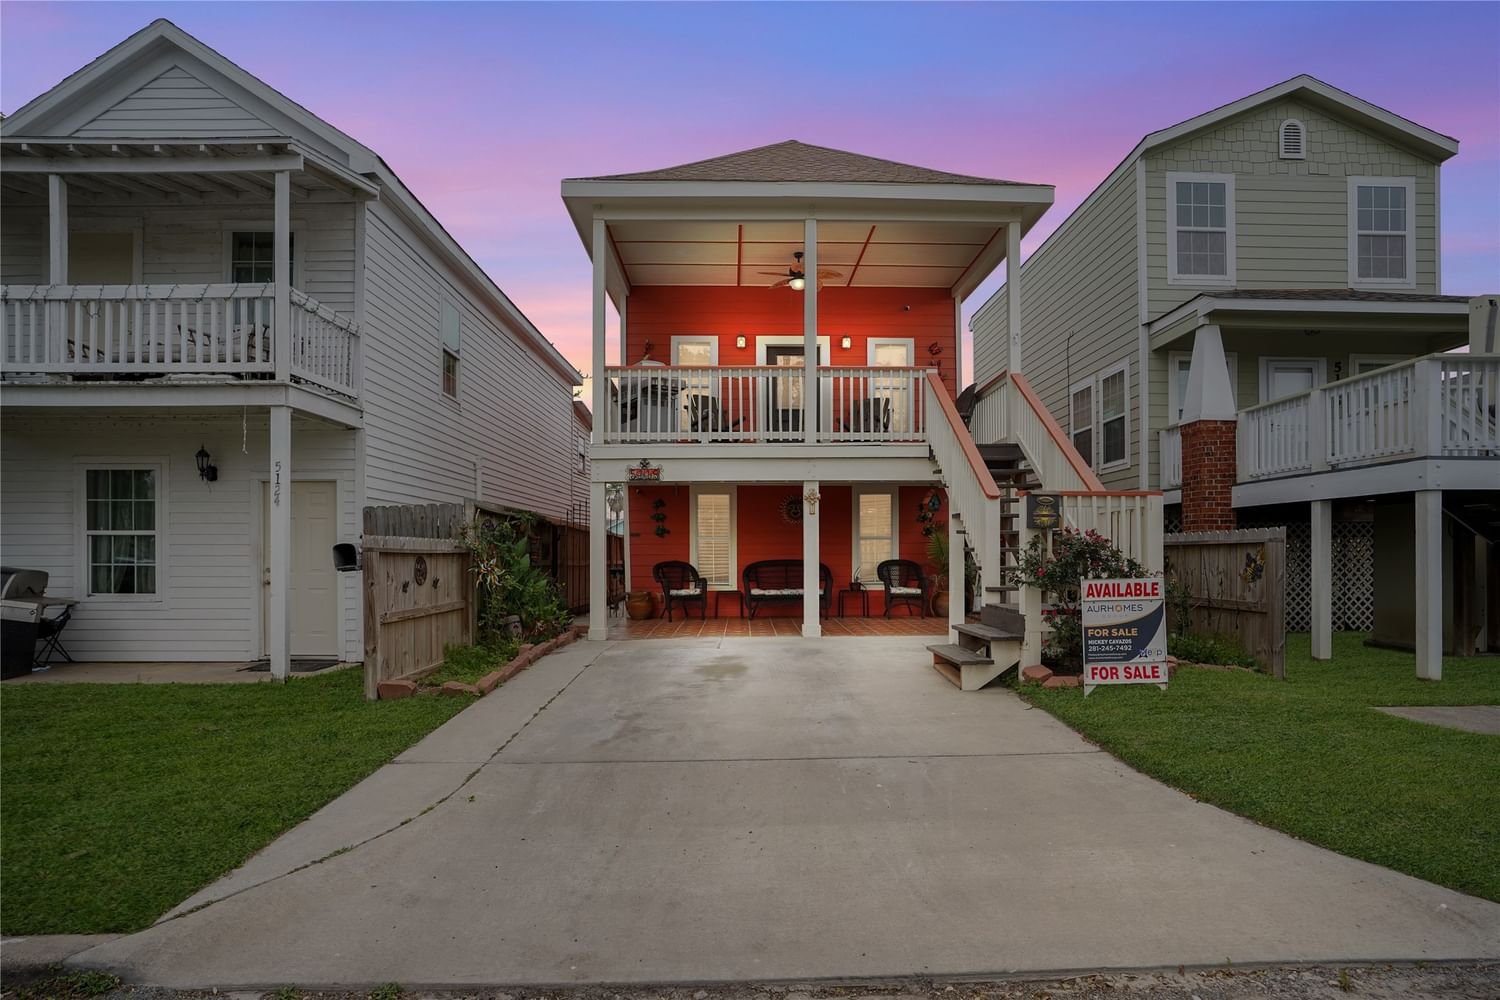 Real estate property located at 5118 Avenue M, Galveston, I-45 South over Causeway- at 53rd Street, Galveston, TX, US